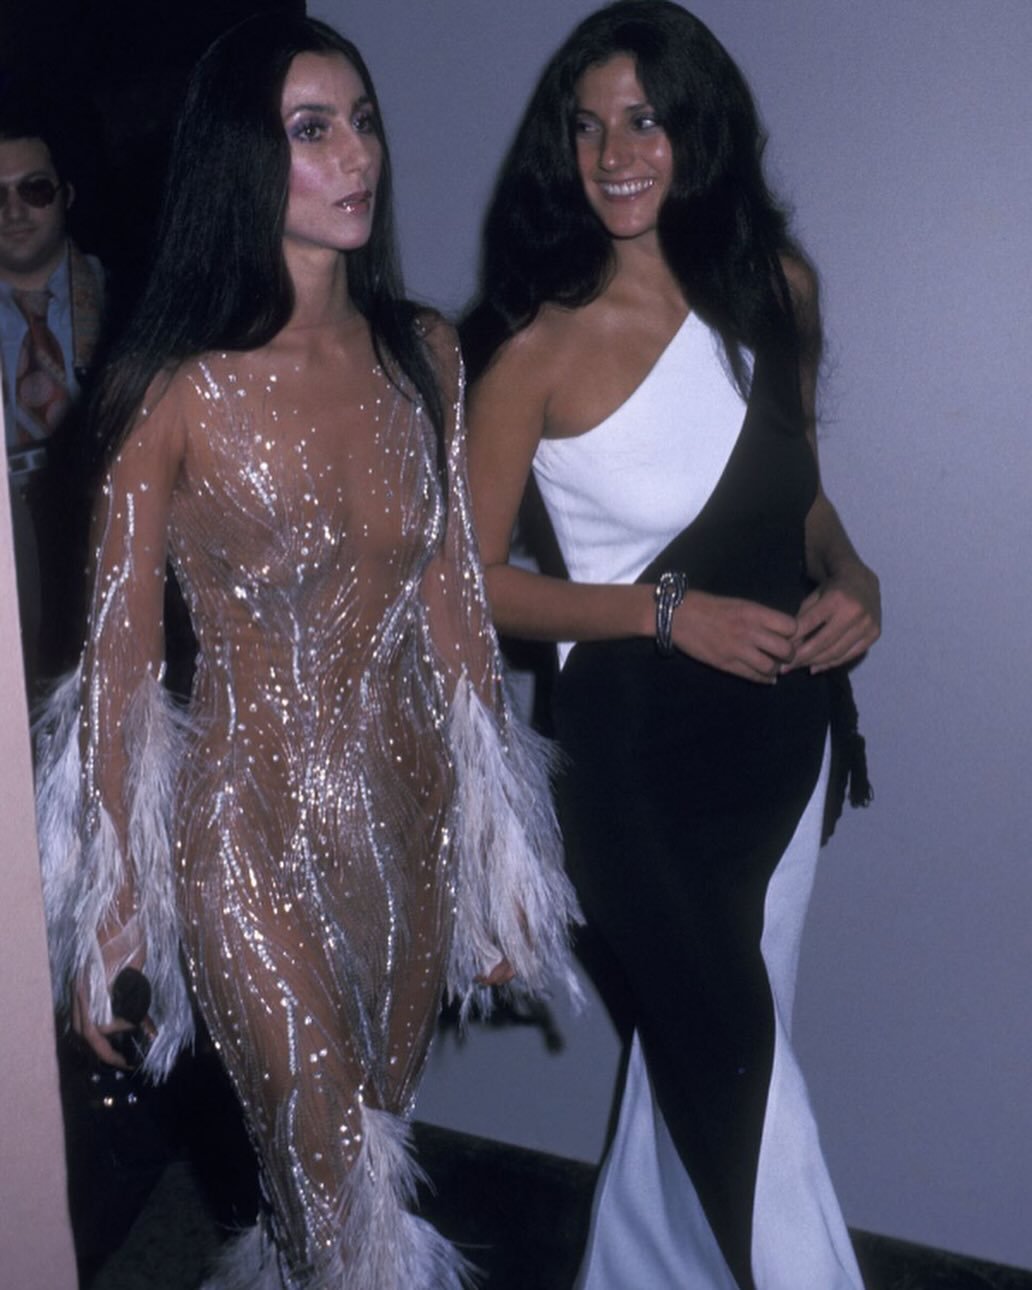 A round-up of my all time favorite met gala looks over the years in honor of the first Monday in May 🖤

1) Cher in a Bob Mackie &ldquo;naked dress&rdquo;, 1974
2) Kendall Jenner in Givenchy, 2021
3) Blake Lively in Versace Atelier, 2022
4) Beyonc&ea